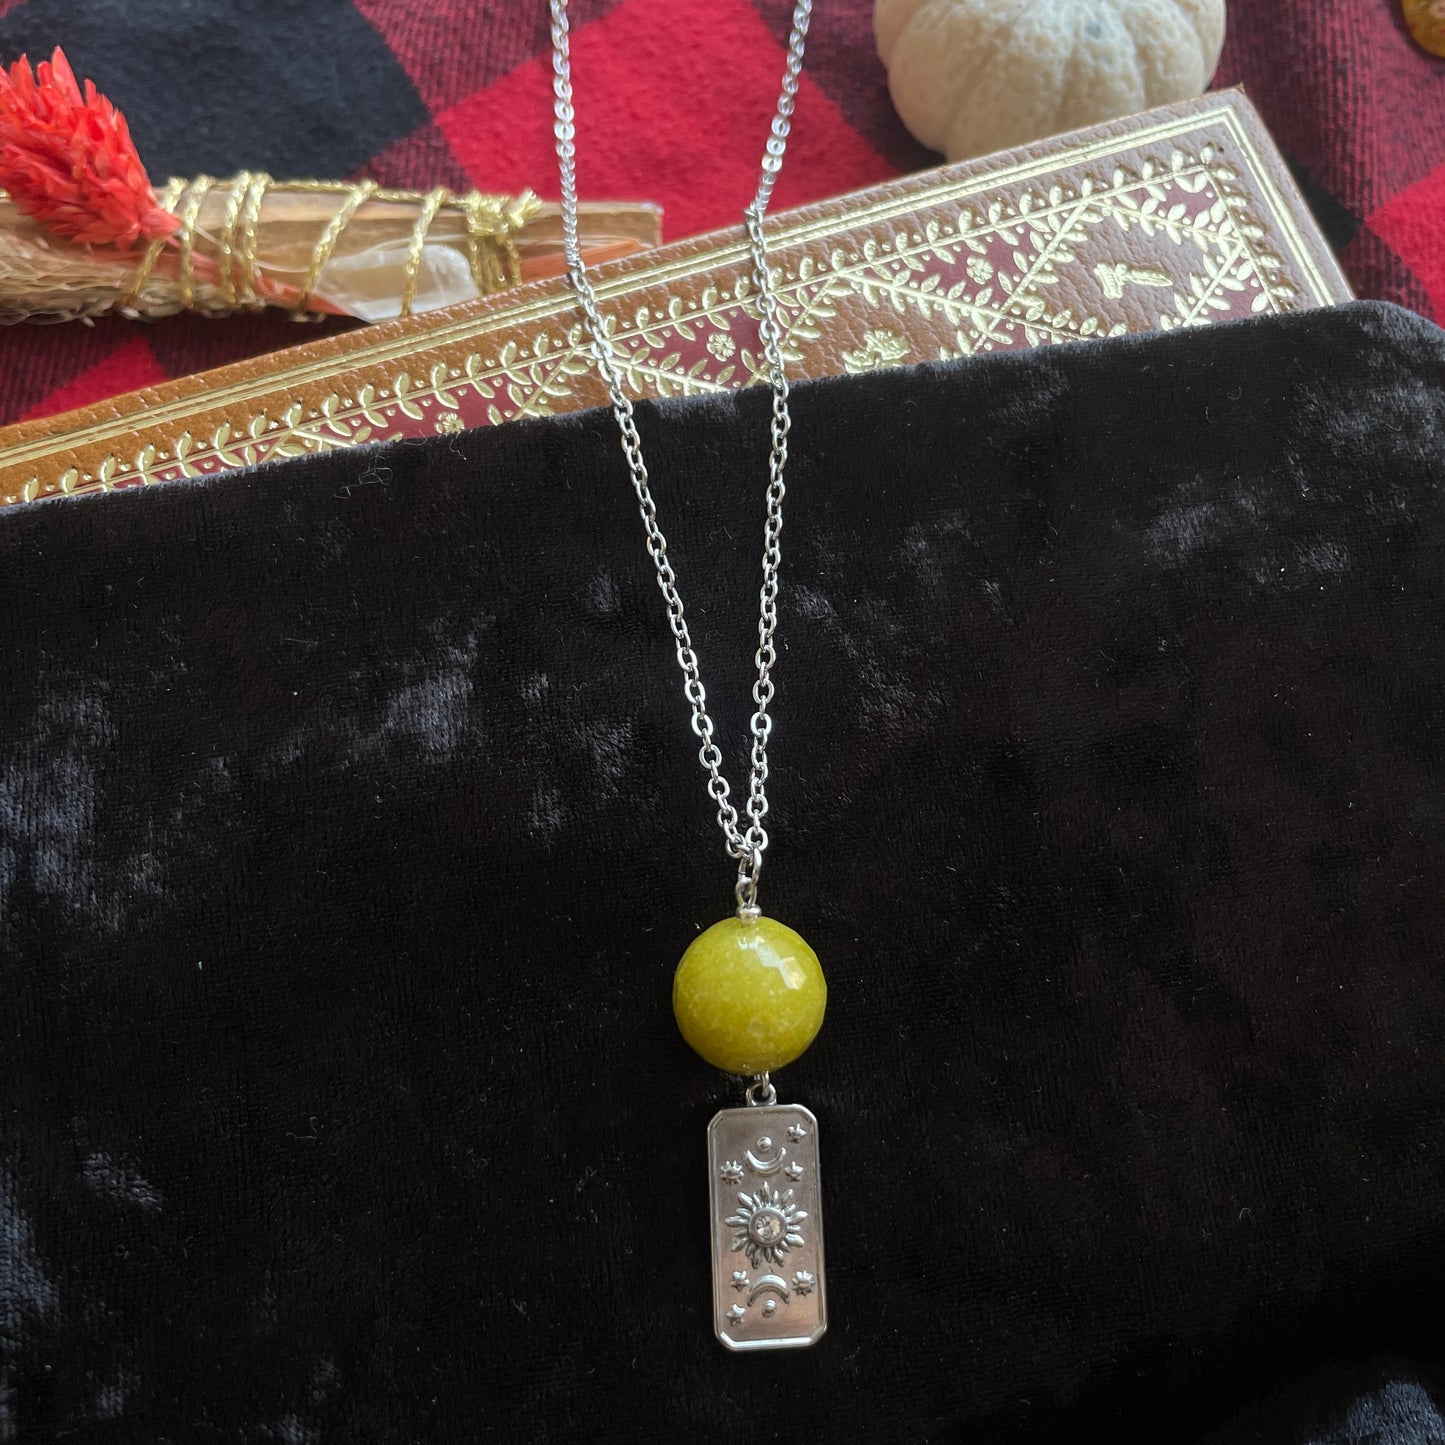 Long necklace - Ginny (green calcite)